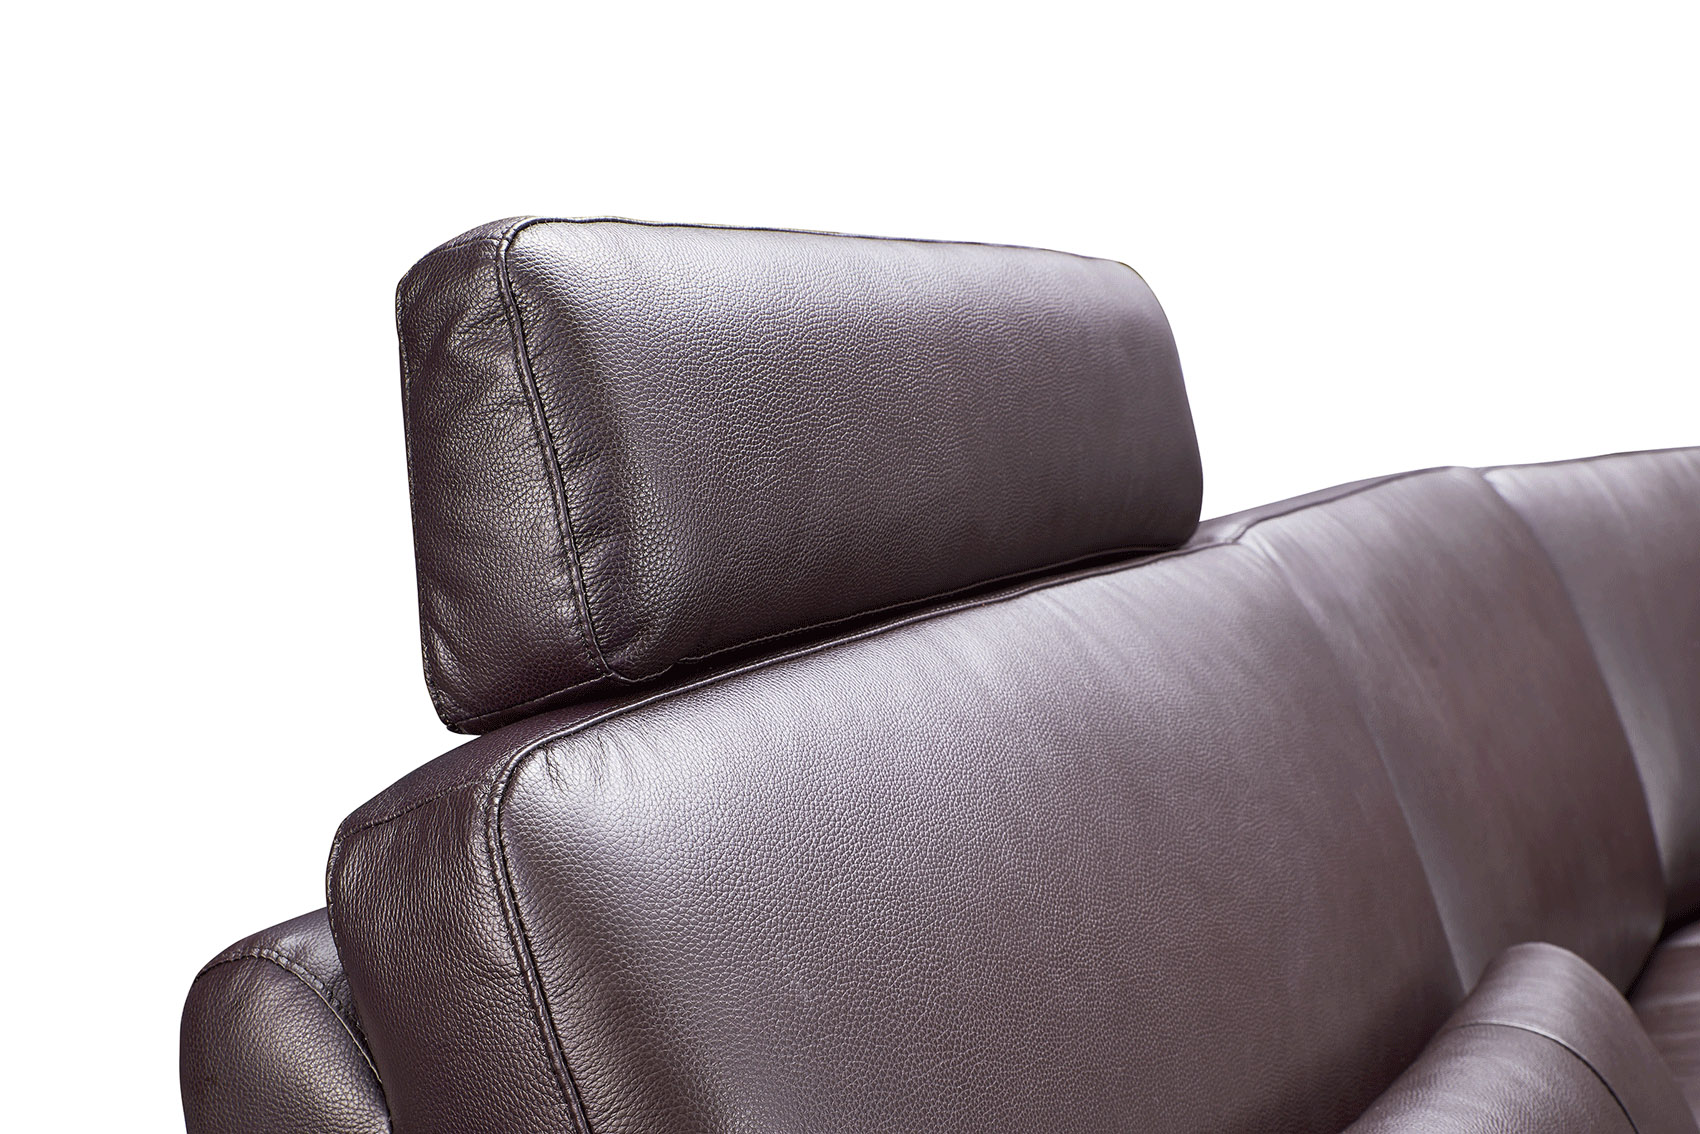 Exquisite Leather Upholstery Corner L-shape Sofa - Click Image to Close